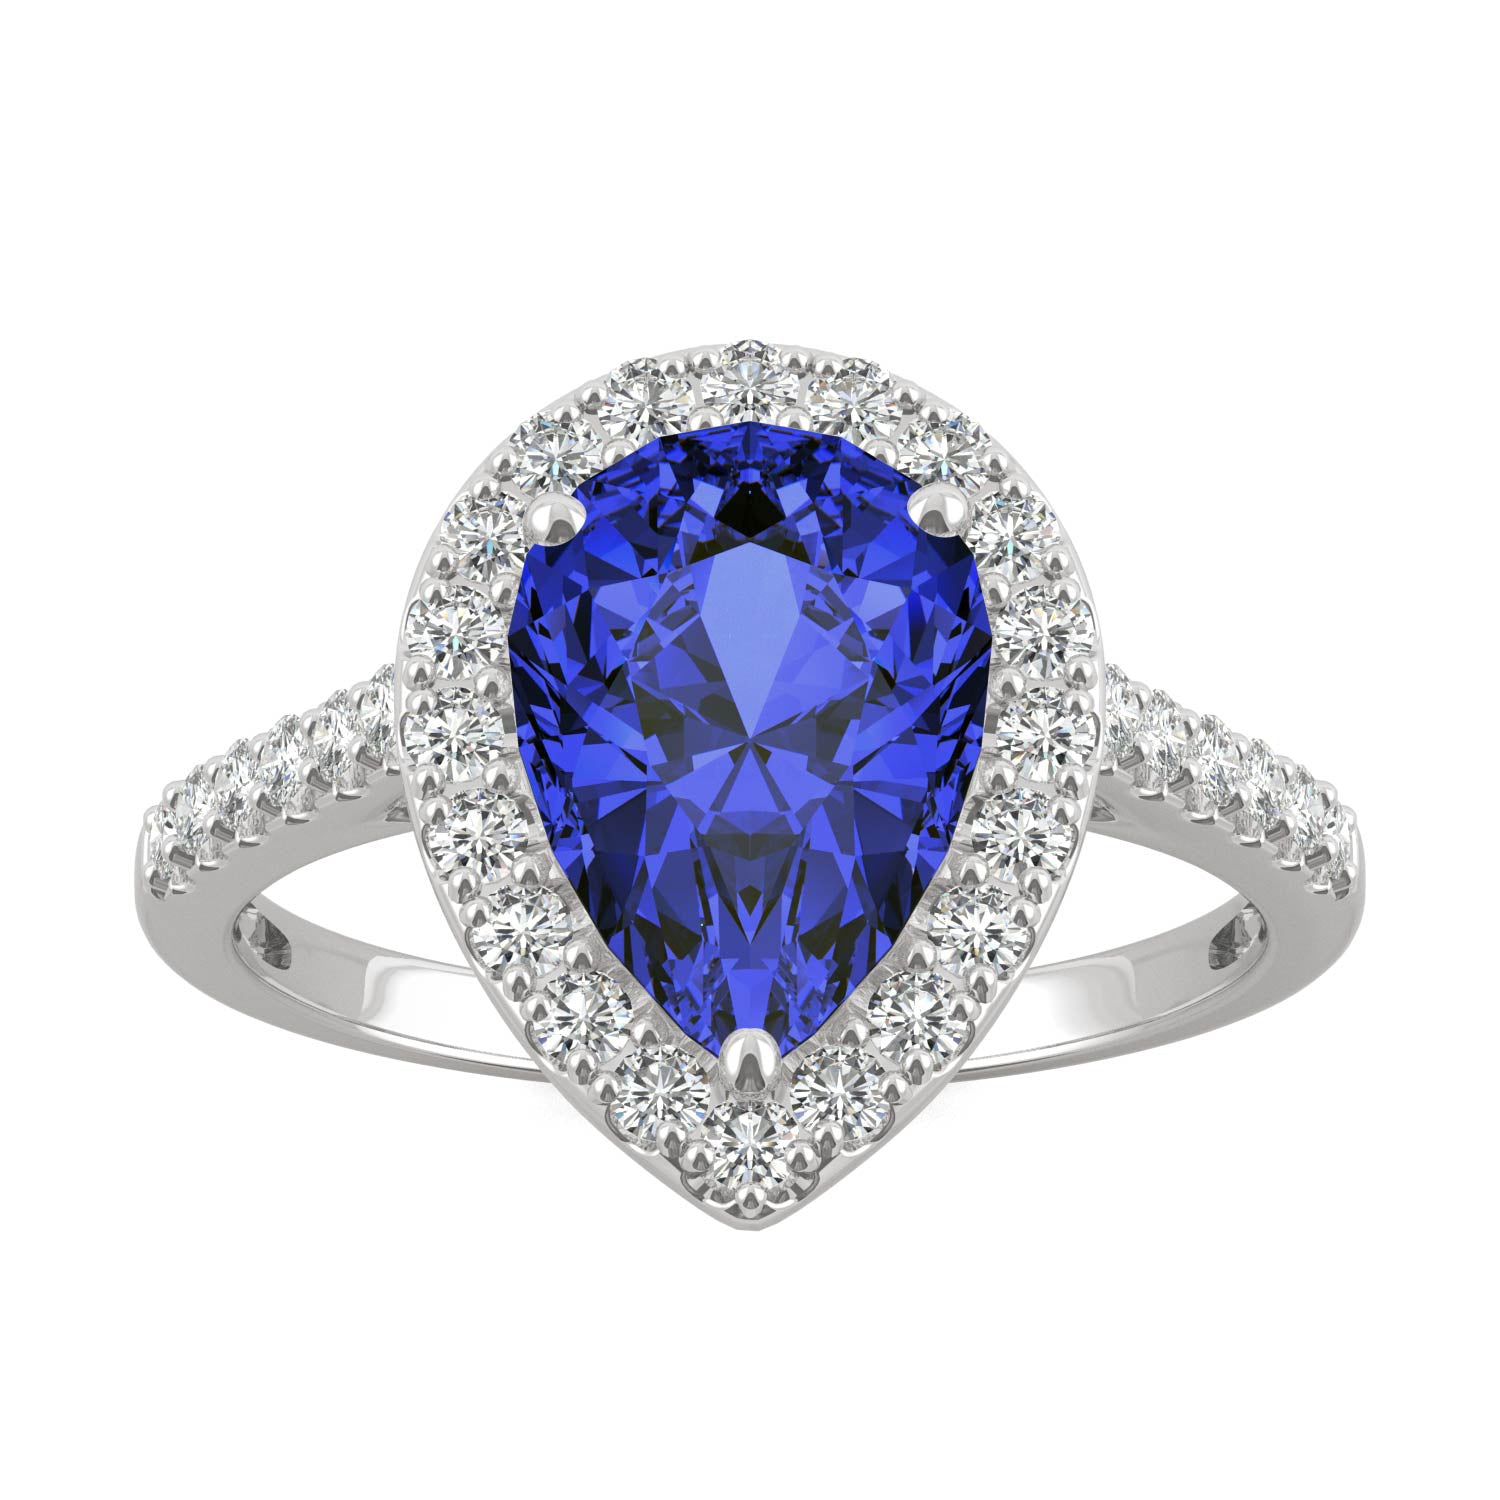 2.98 CTW DEW Pear Sapphire Halo Ring in 14K White Gold